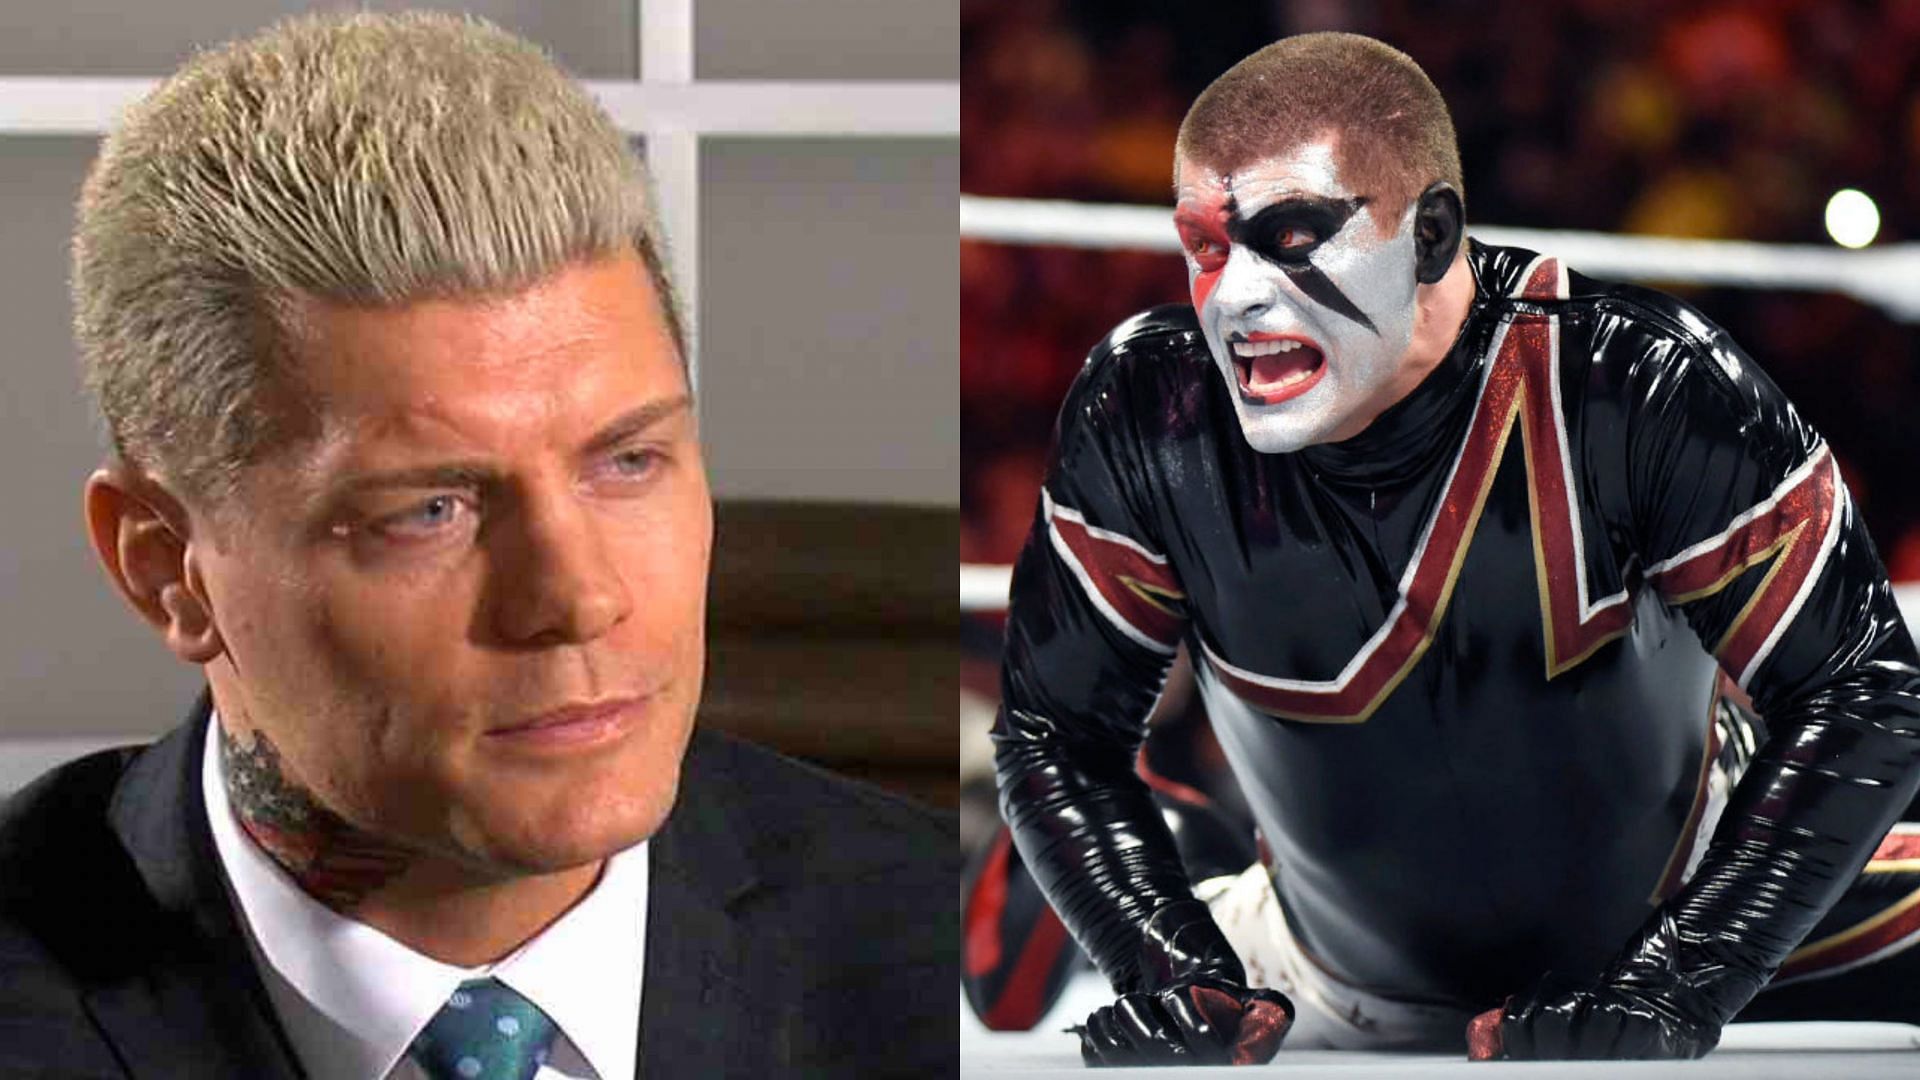 Cody Rhodes was not a big fan of his Stardust character in WWE